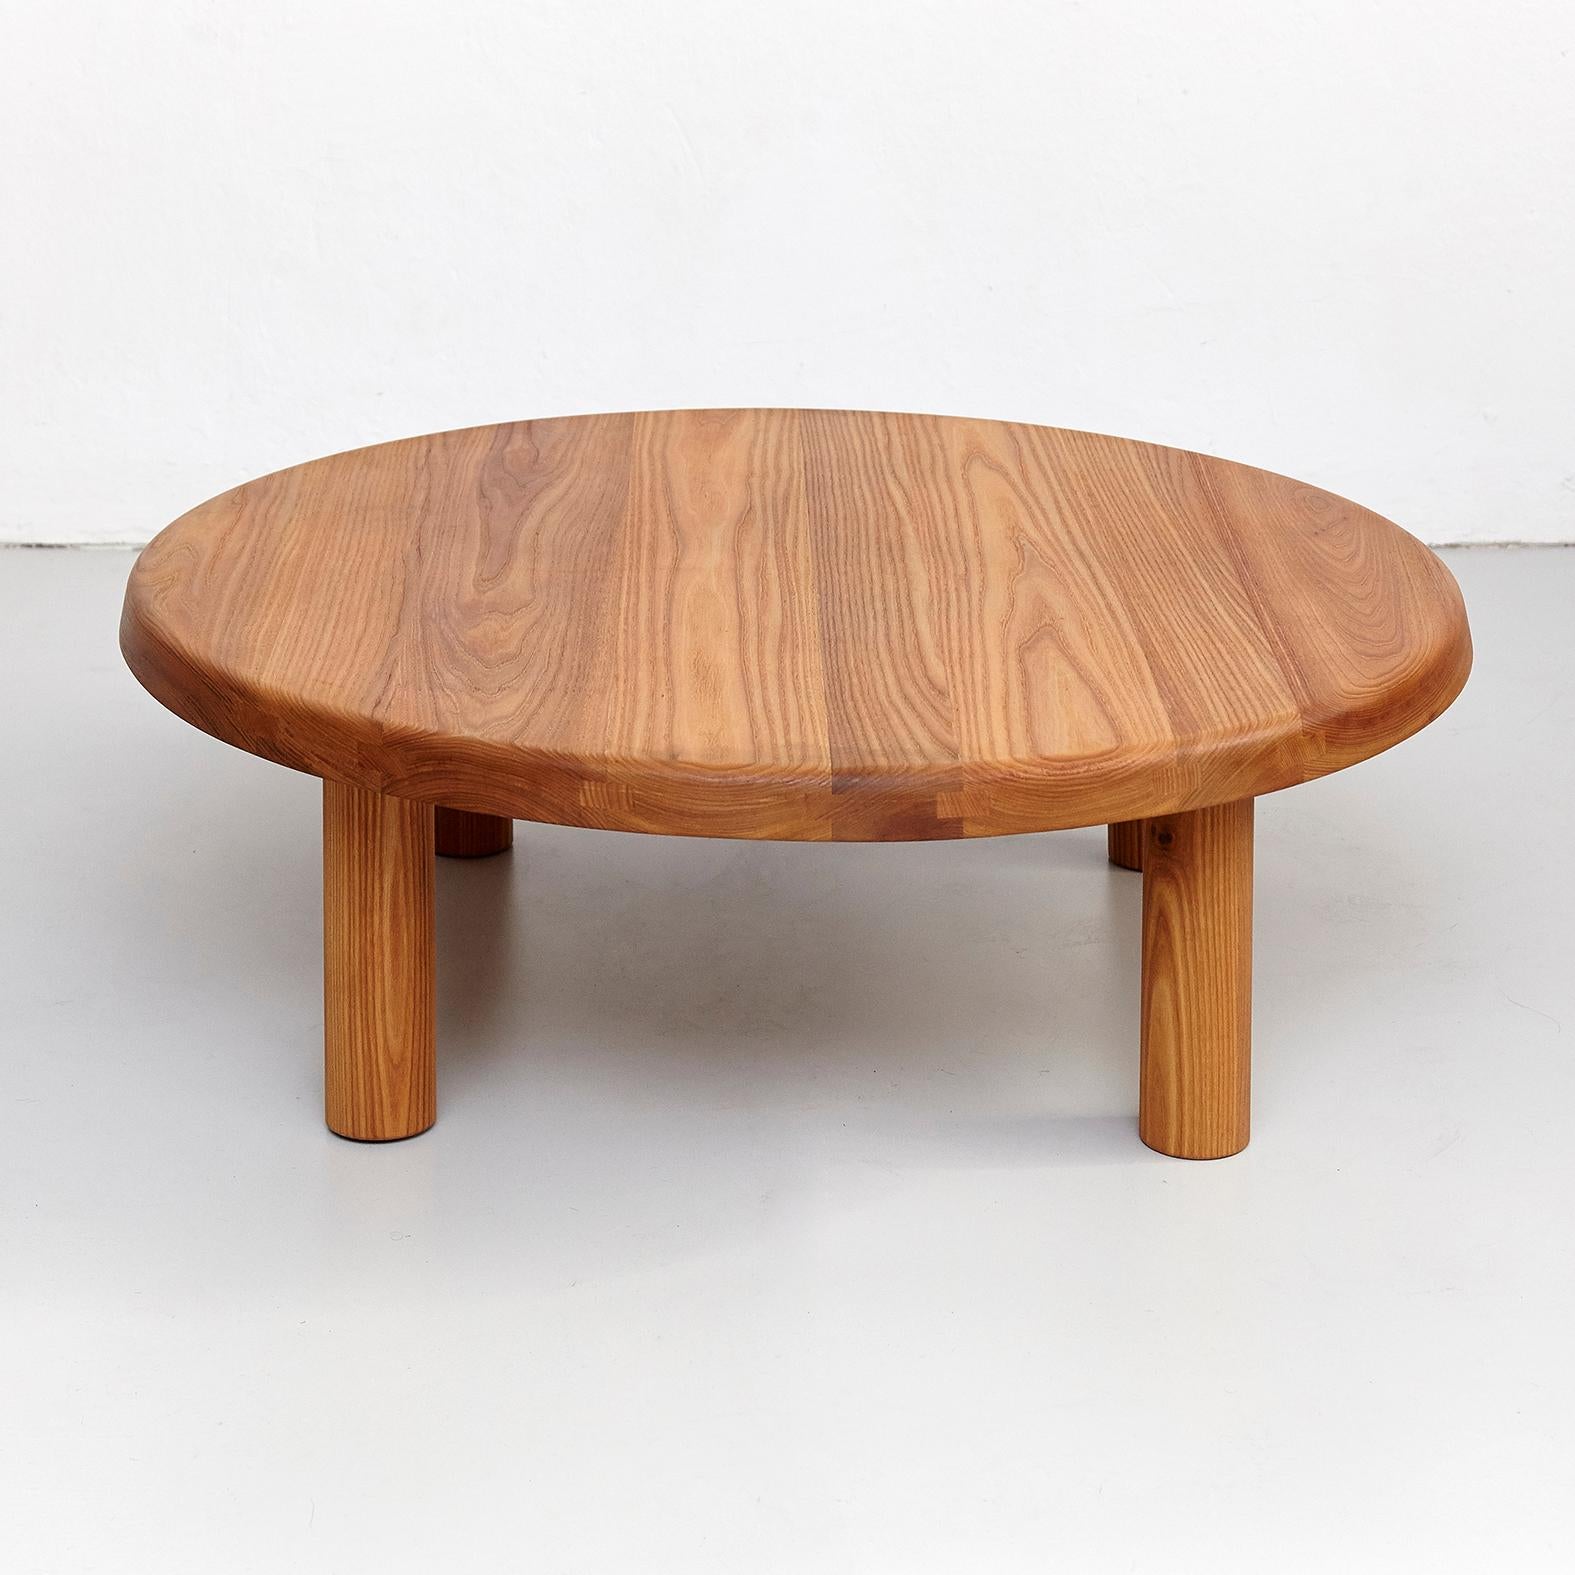 Coffee table designed by Pierre Chapo, 
Manufactured by Chapo Creations in France.

Solid elmwood.

Measure: 95 x 33 cm

This is a piece made upon request, each wood is different so the drawing of the wood and wood tone will be different on each